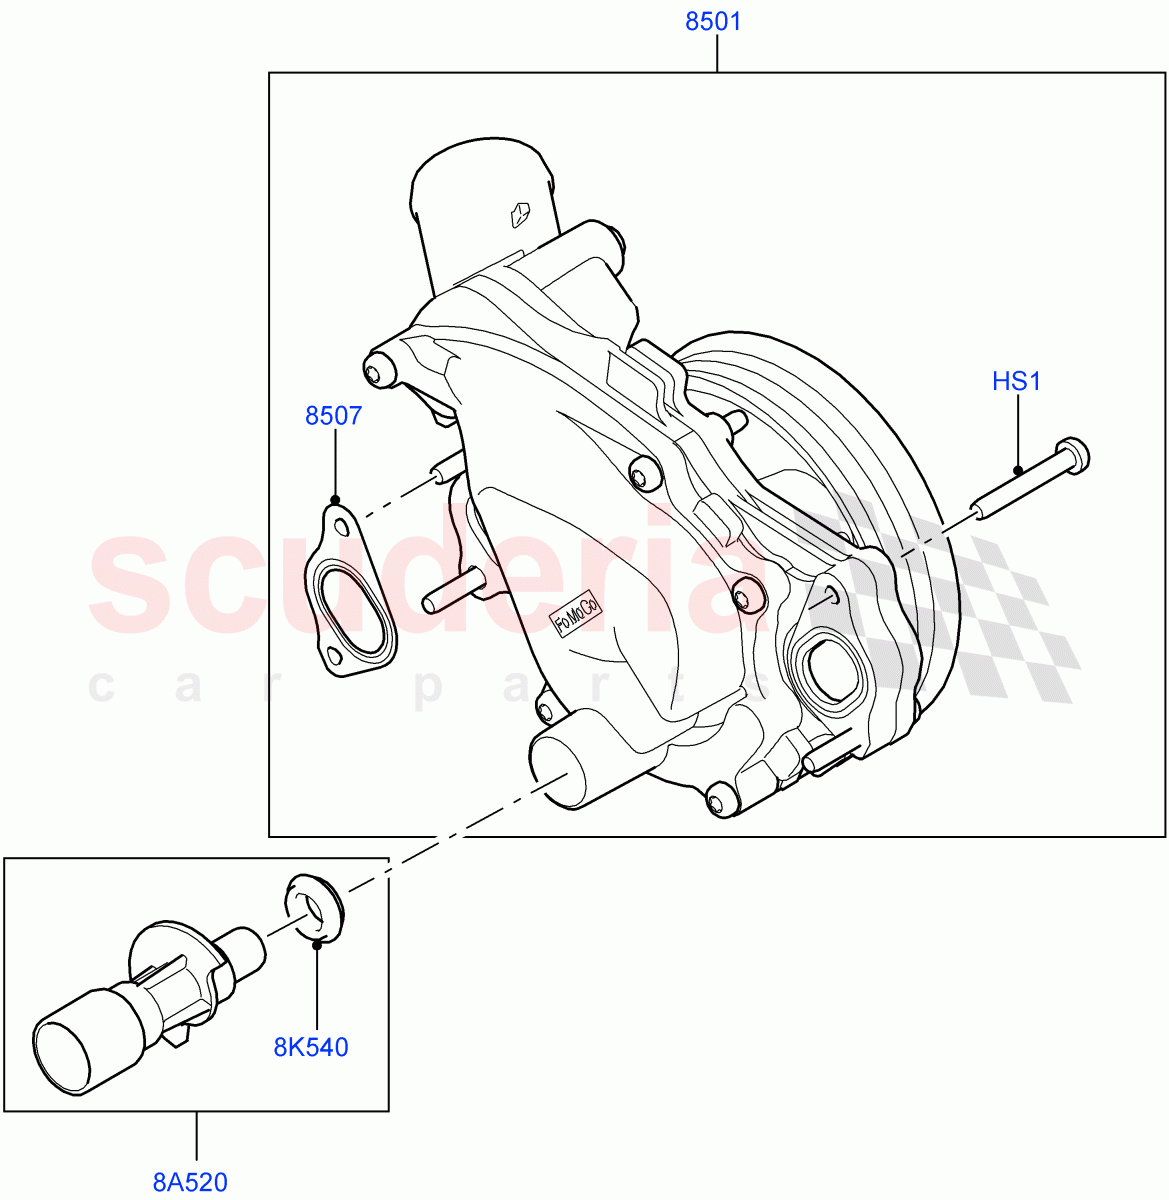 Water Pump(Main Unit, Nitra Plant Build)(3.0L DOHC GDI SC V6 PETROL)((V)FROMK2000001) of Land Rover Land Rover Discovery 5 (2017+) [3.0 DOHC GDI SC V6 Petrol]